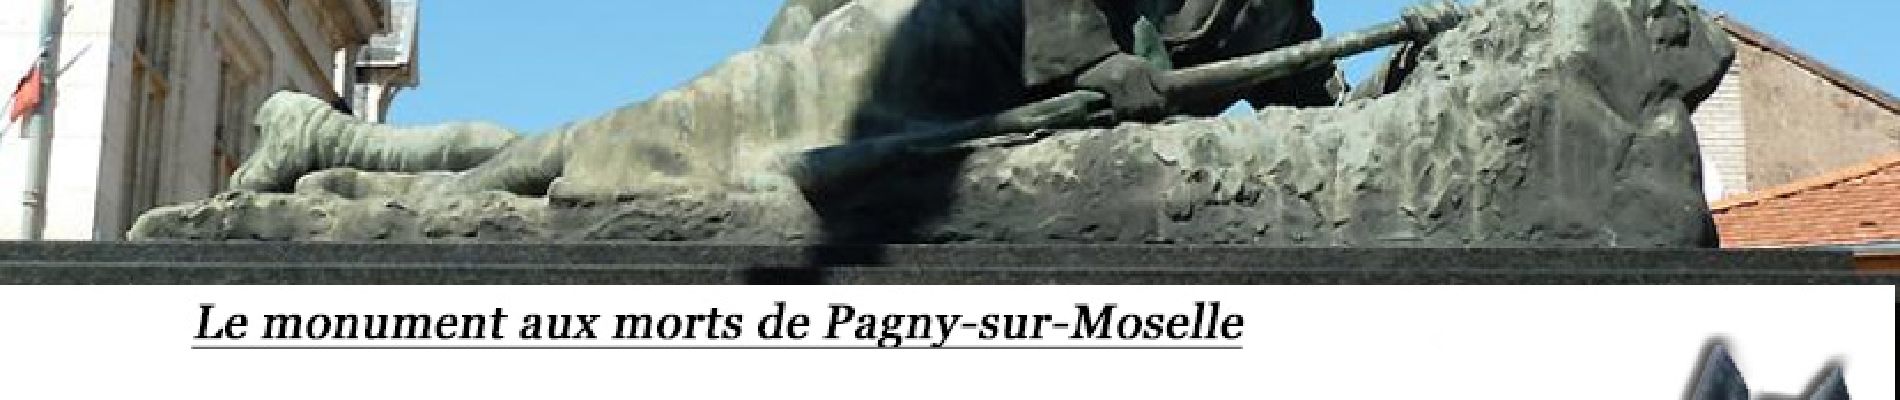 POI Pagny-sur-Moselle - Pagny-sur-Moselle 5 - Photo